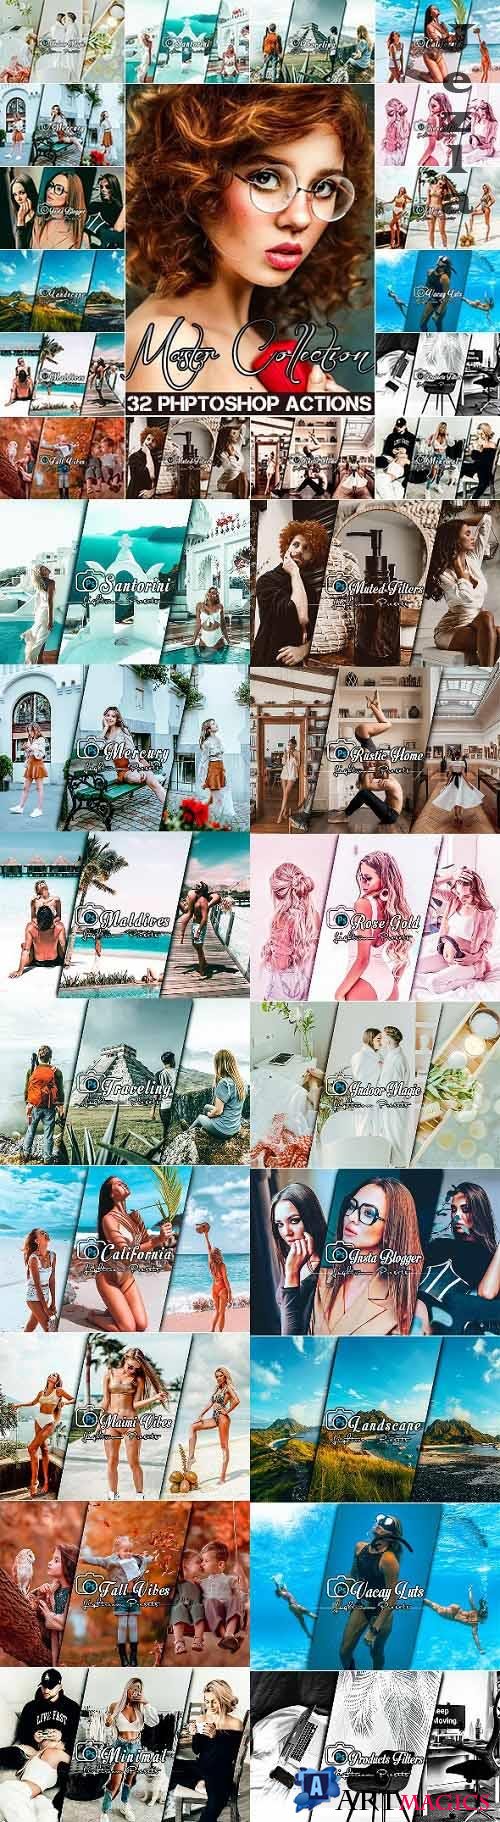 Master Collection 32 Photoshop Actions - 34071238